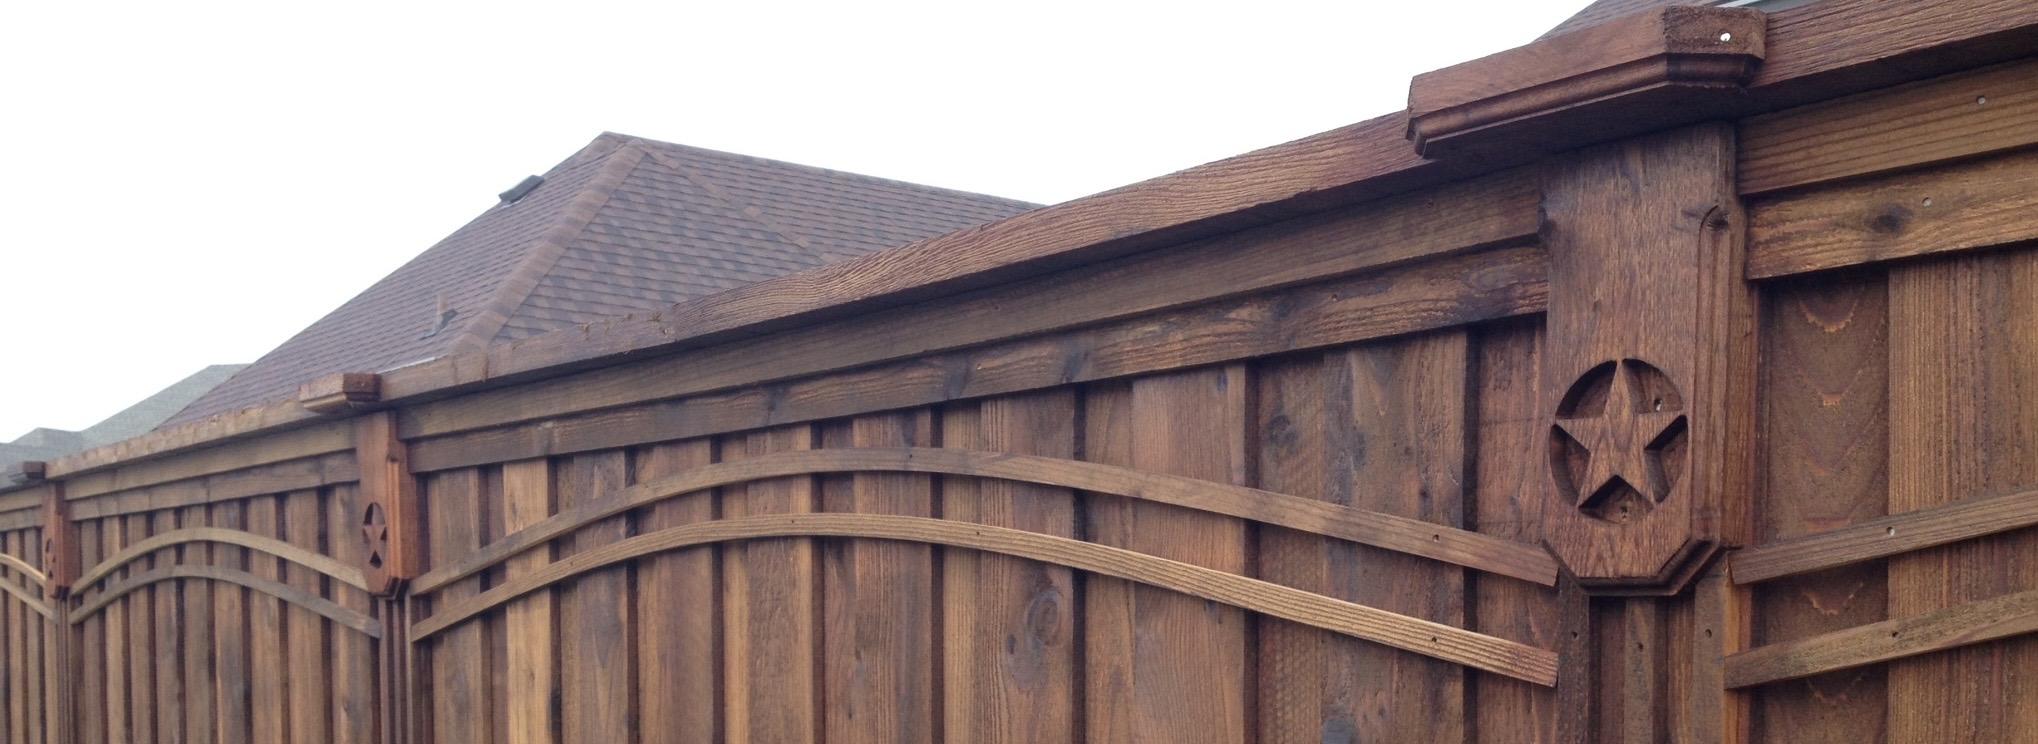 Best Fence Company in Dallas Fort Worth Area